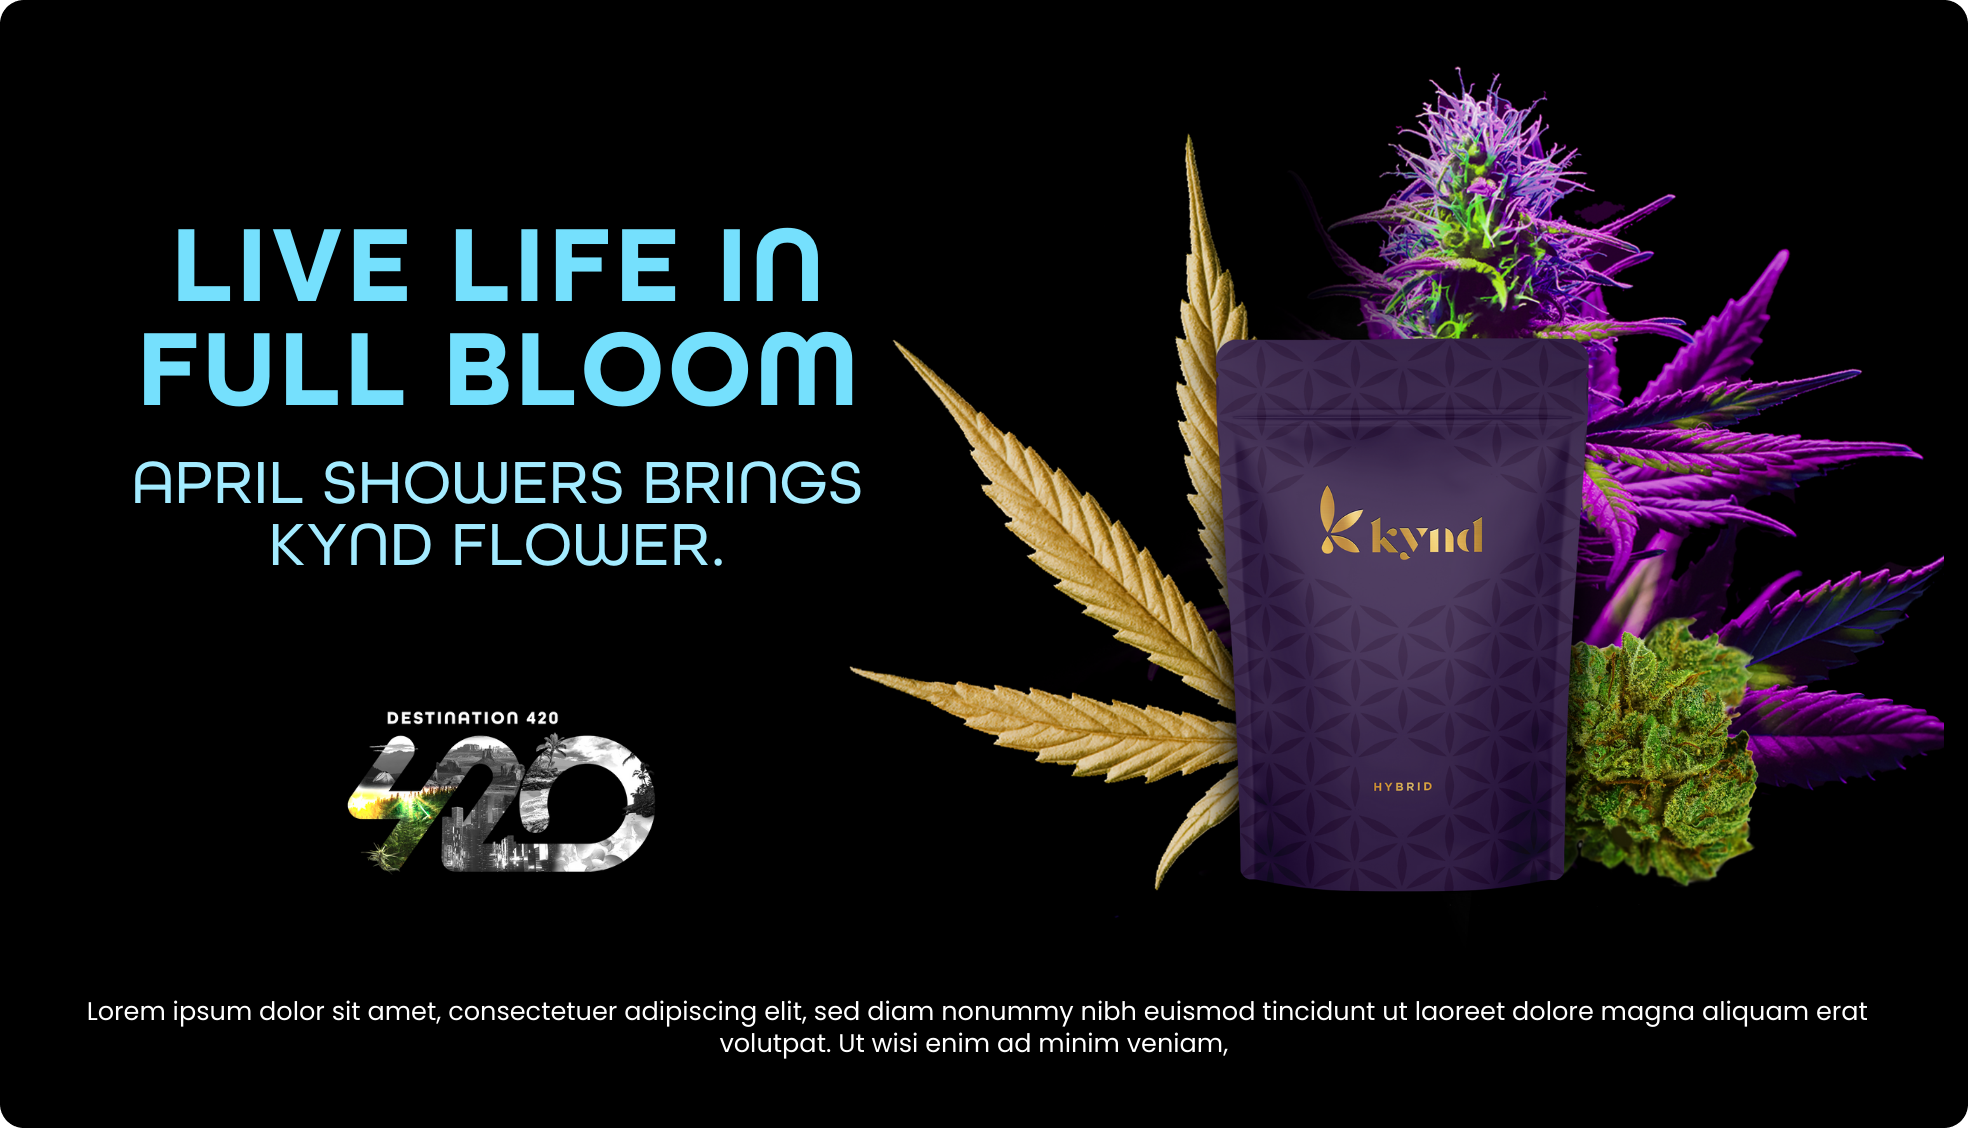 in-store product placement on TV menus at a cannabis dispensary - Kynd flower